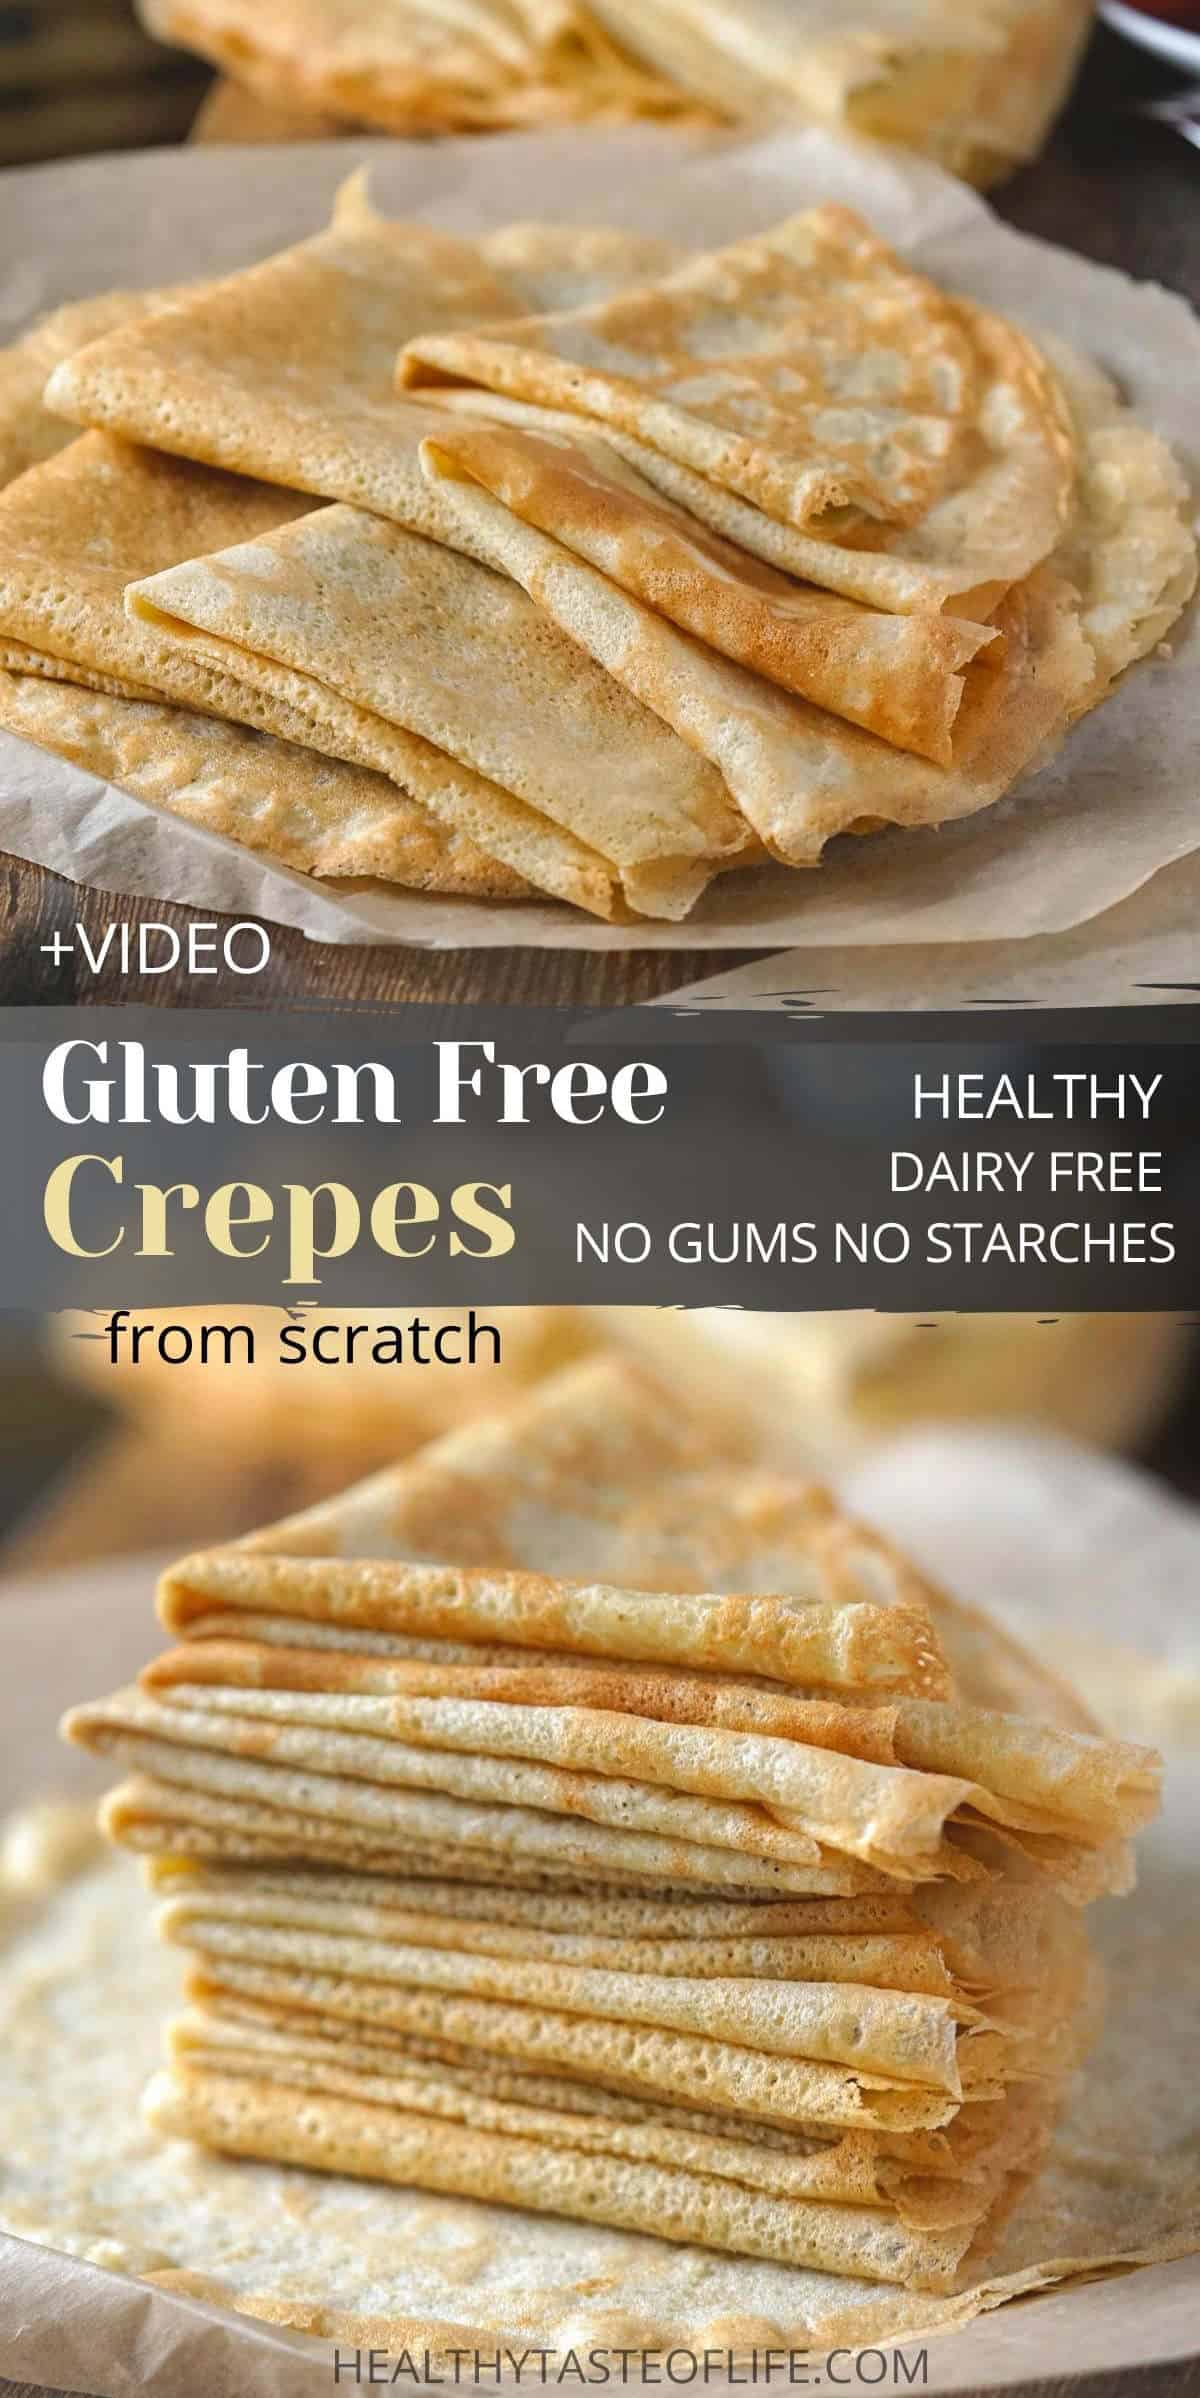 Gluten free dairy free crepes that can be served with sweet and savory fillings. The crepes are made with healthy gluten free flours, dairy free milk and eggs – easily mixed in a blender. As a result you get paper thin crepes, flexible without using gums or tapioca starch in the flour mix. These dairy and gluten free crepes are great as a healthy dessert, breakfast, brunch or even dinner. #glutenfreecrepes #dairyfreecrepes #glutenfreedairyfree #crepes #healthycrepes #glutenfreedairyfreebreakfast